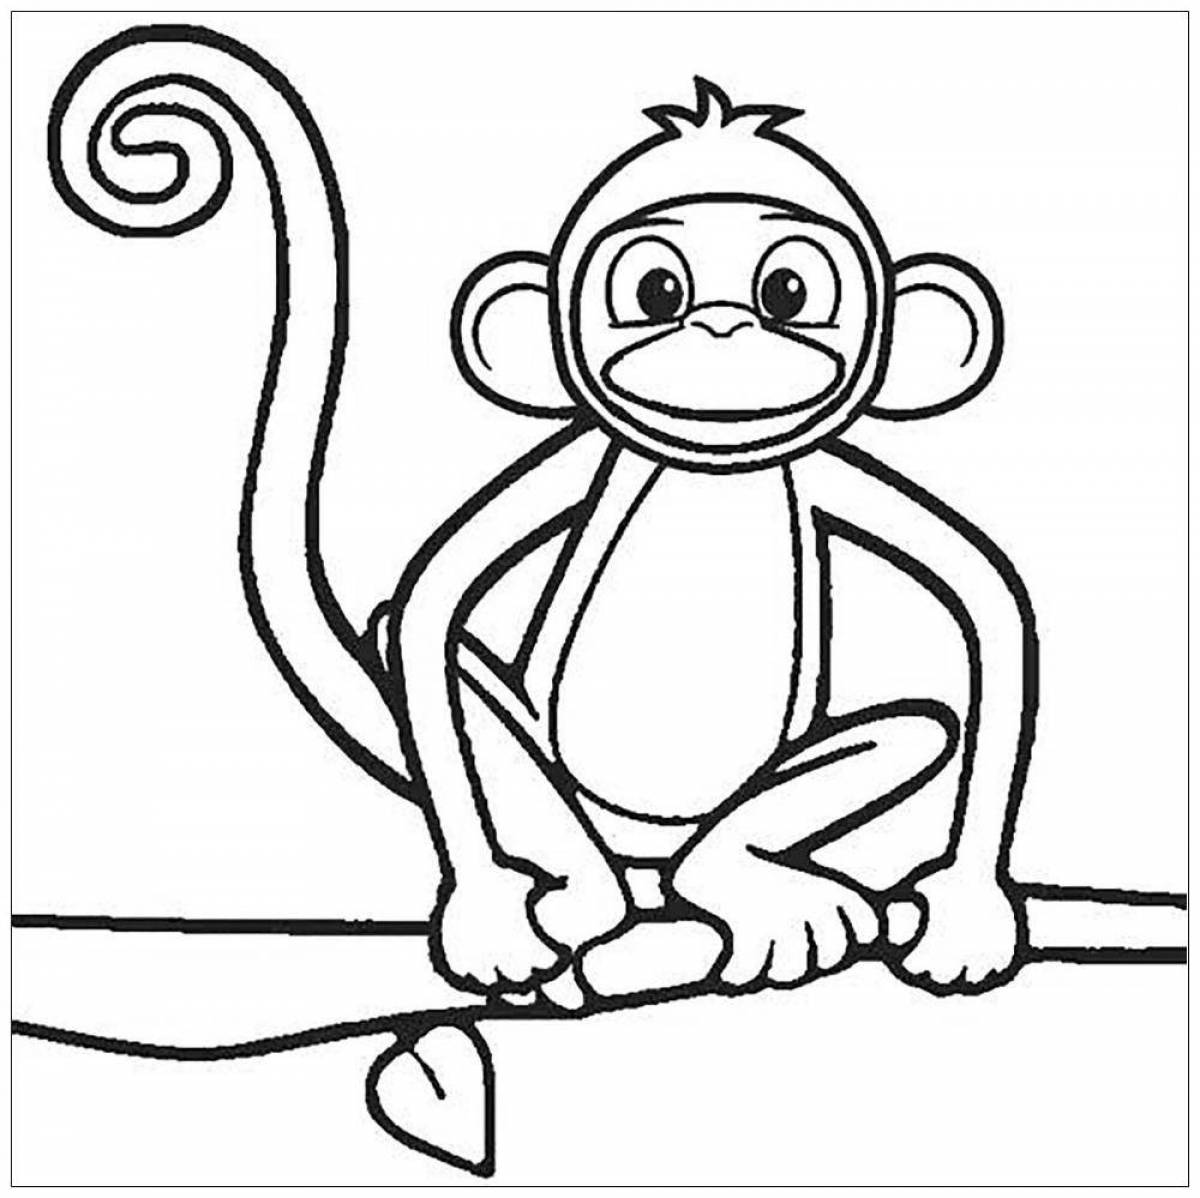 Naughty monkey coloring book for kids